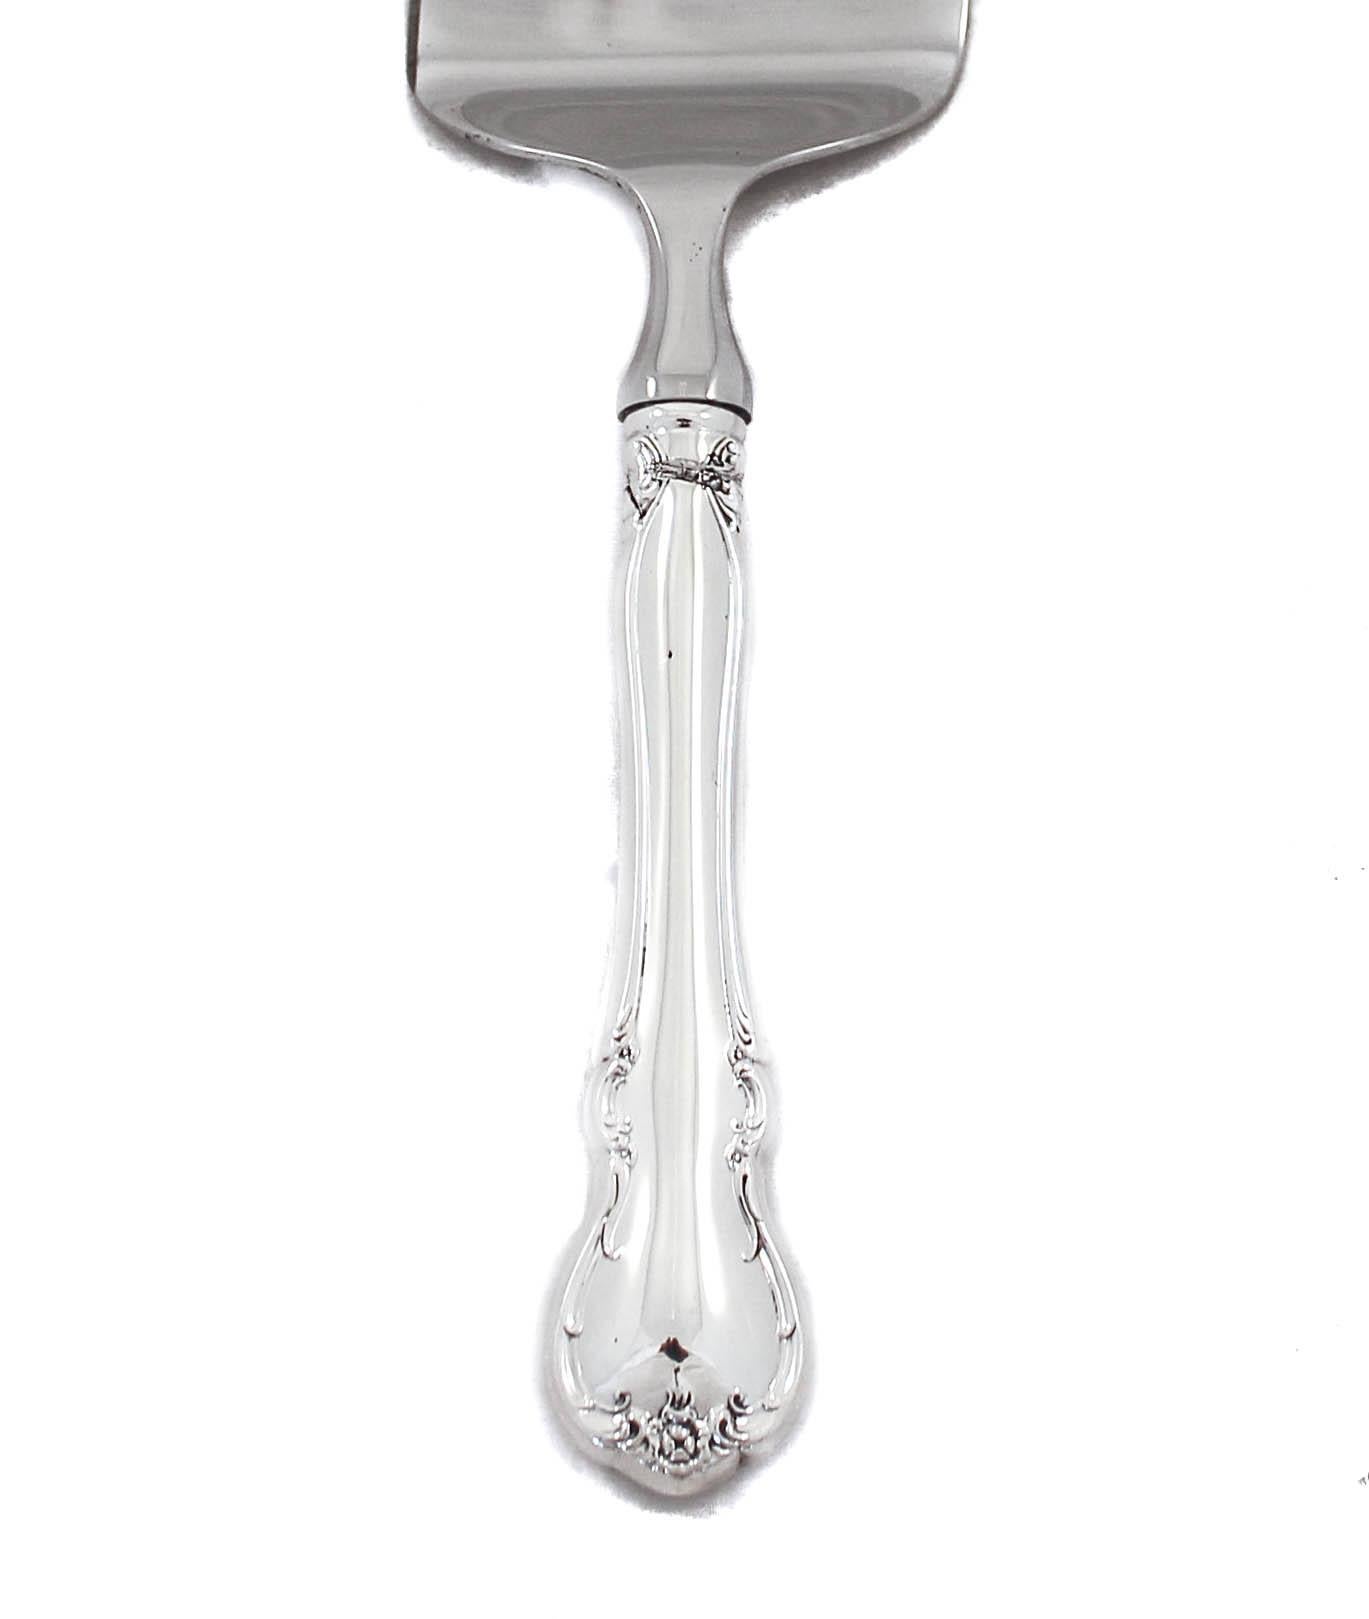 Being offered is a sterling silver hostess helper server. Perfect for pies, cakes, quiche or even fish. The handle has a simple yet elegant design. Makes a lovely holiday, housewarming or hostess gift.